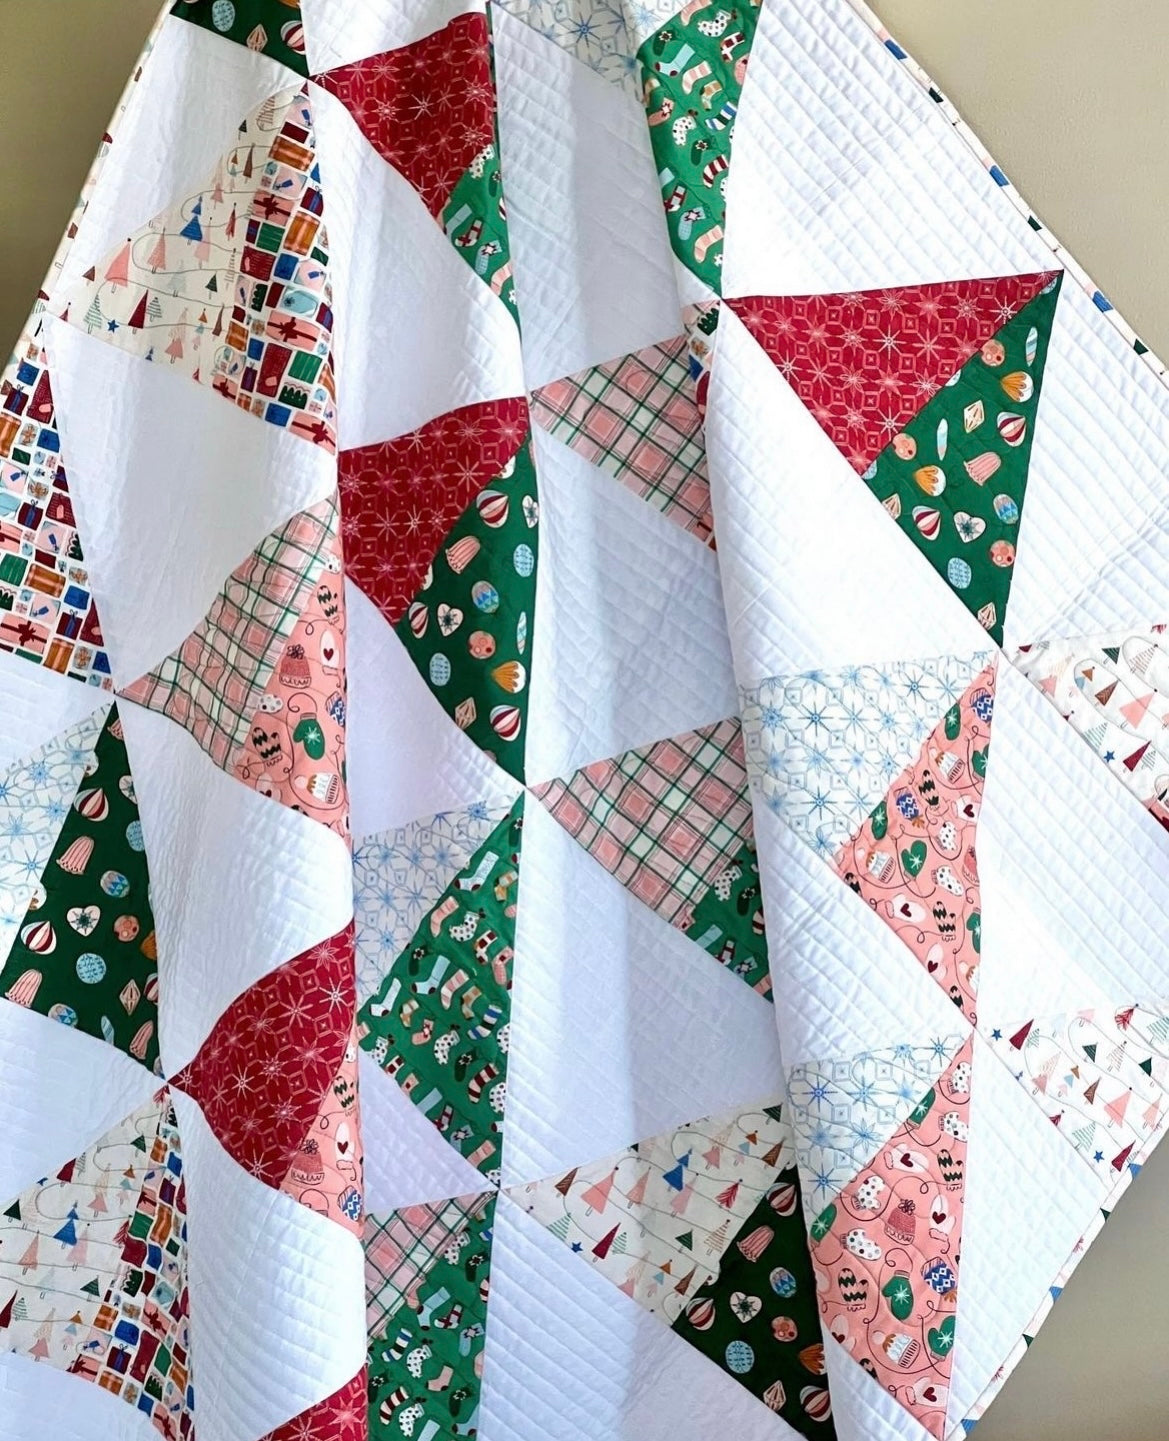 To The Point Quilt Kit - Pattern by Michelle Engel